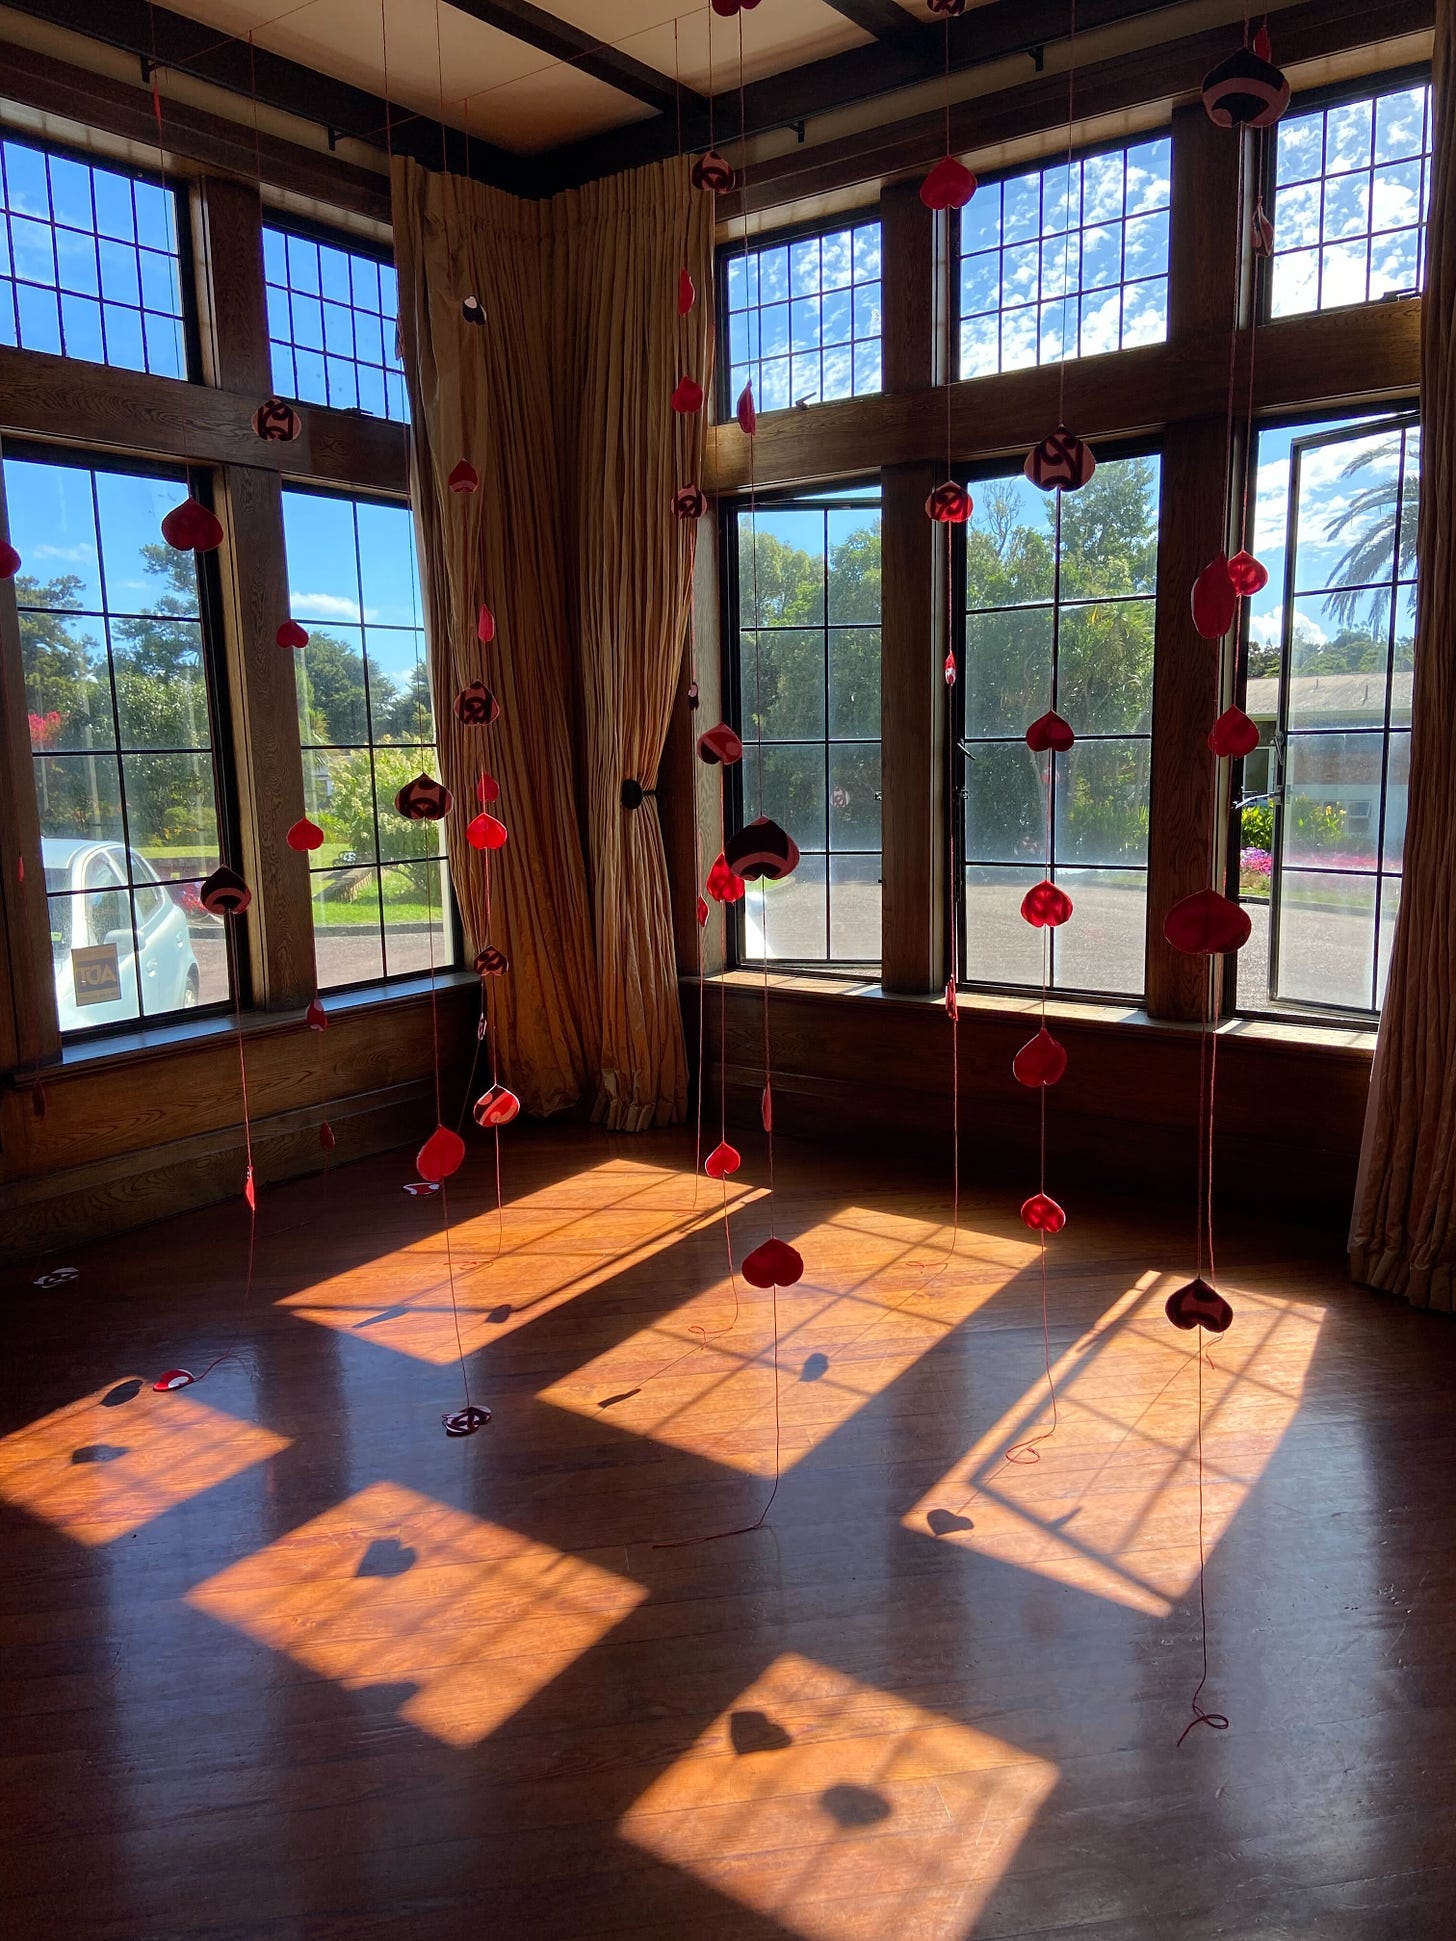 Strings of red hearts are draped from the ceiling in a wooden room and windows with the shadows reflecting on the floor.